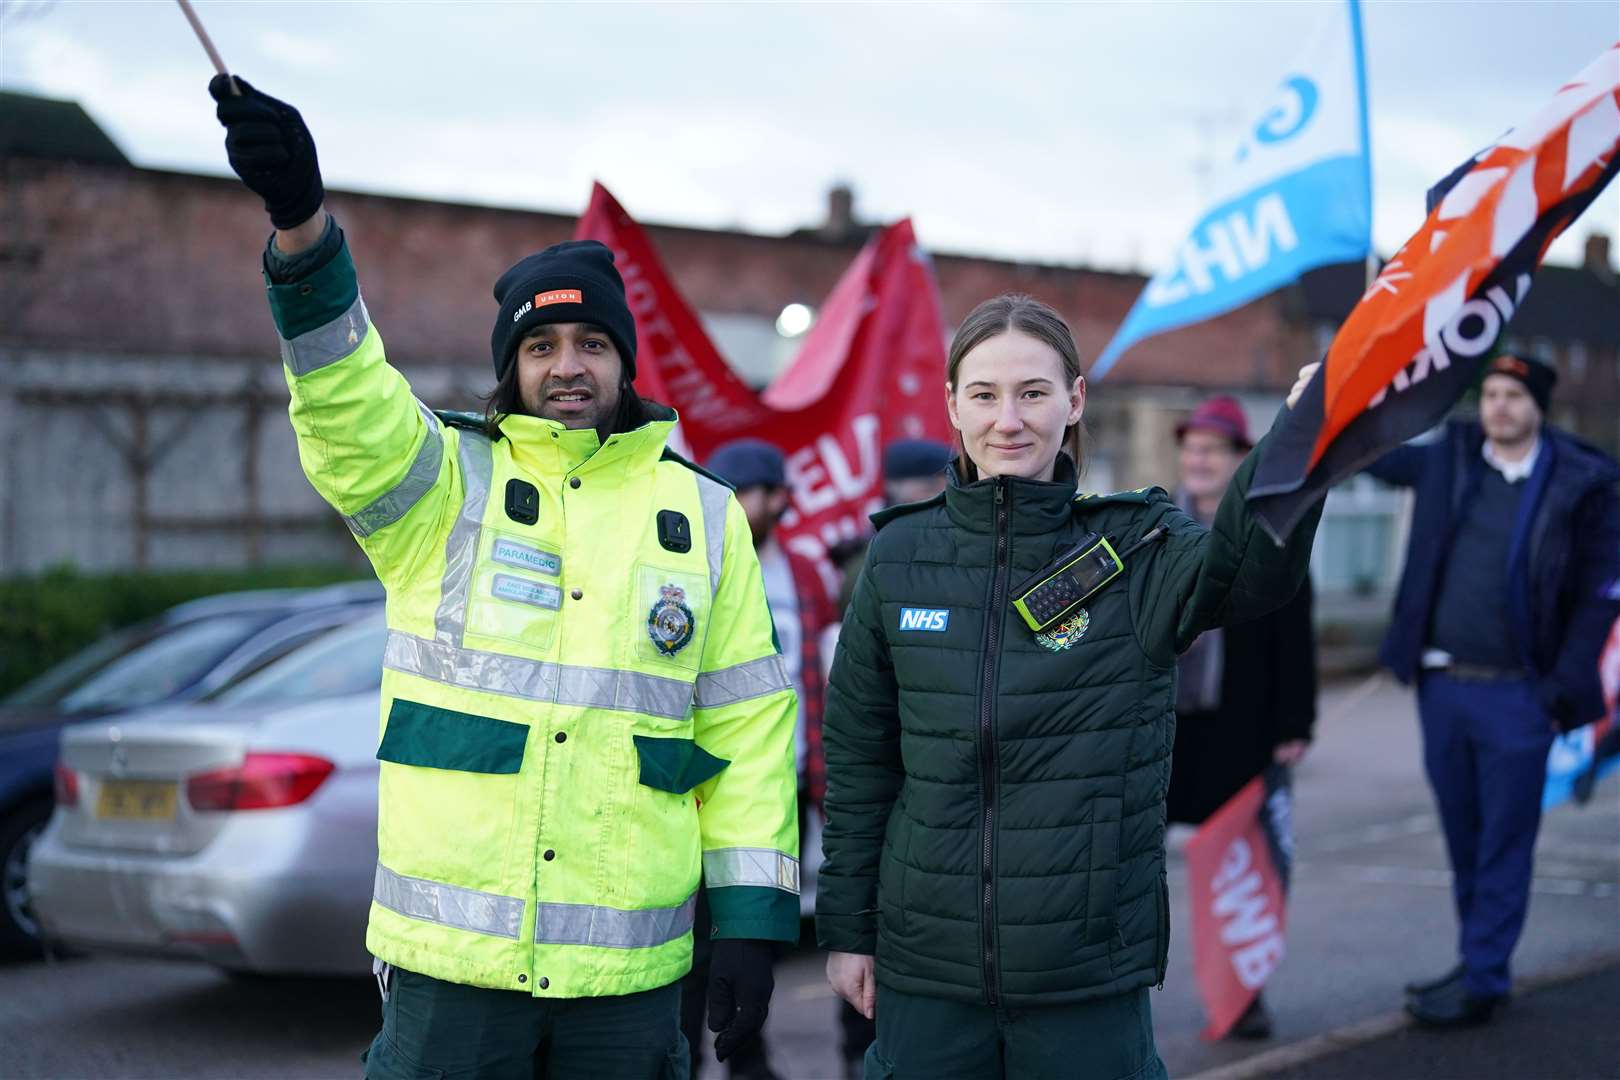 Ambulance workers on the picket line outside Beechdale ambulance station in Nottingham (Jacob King/PA)